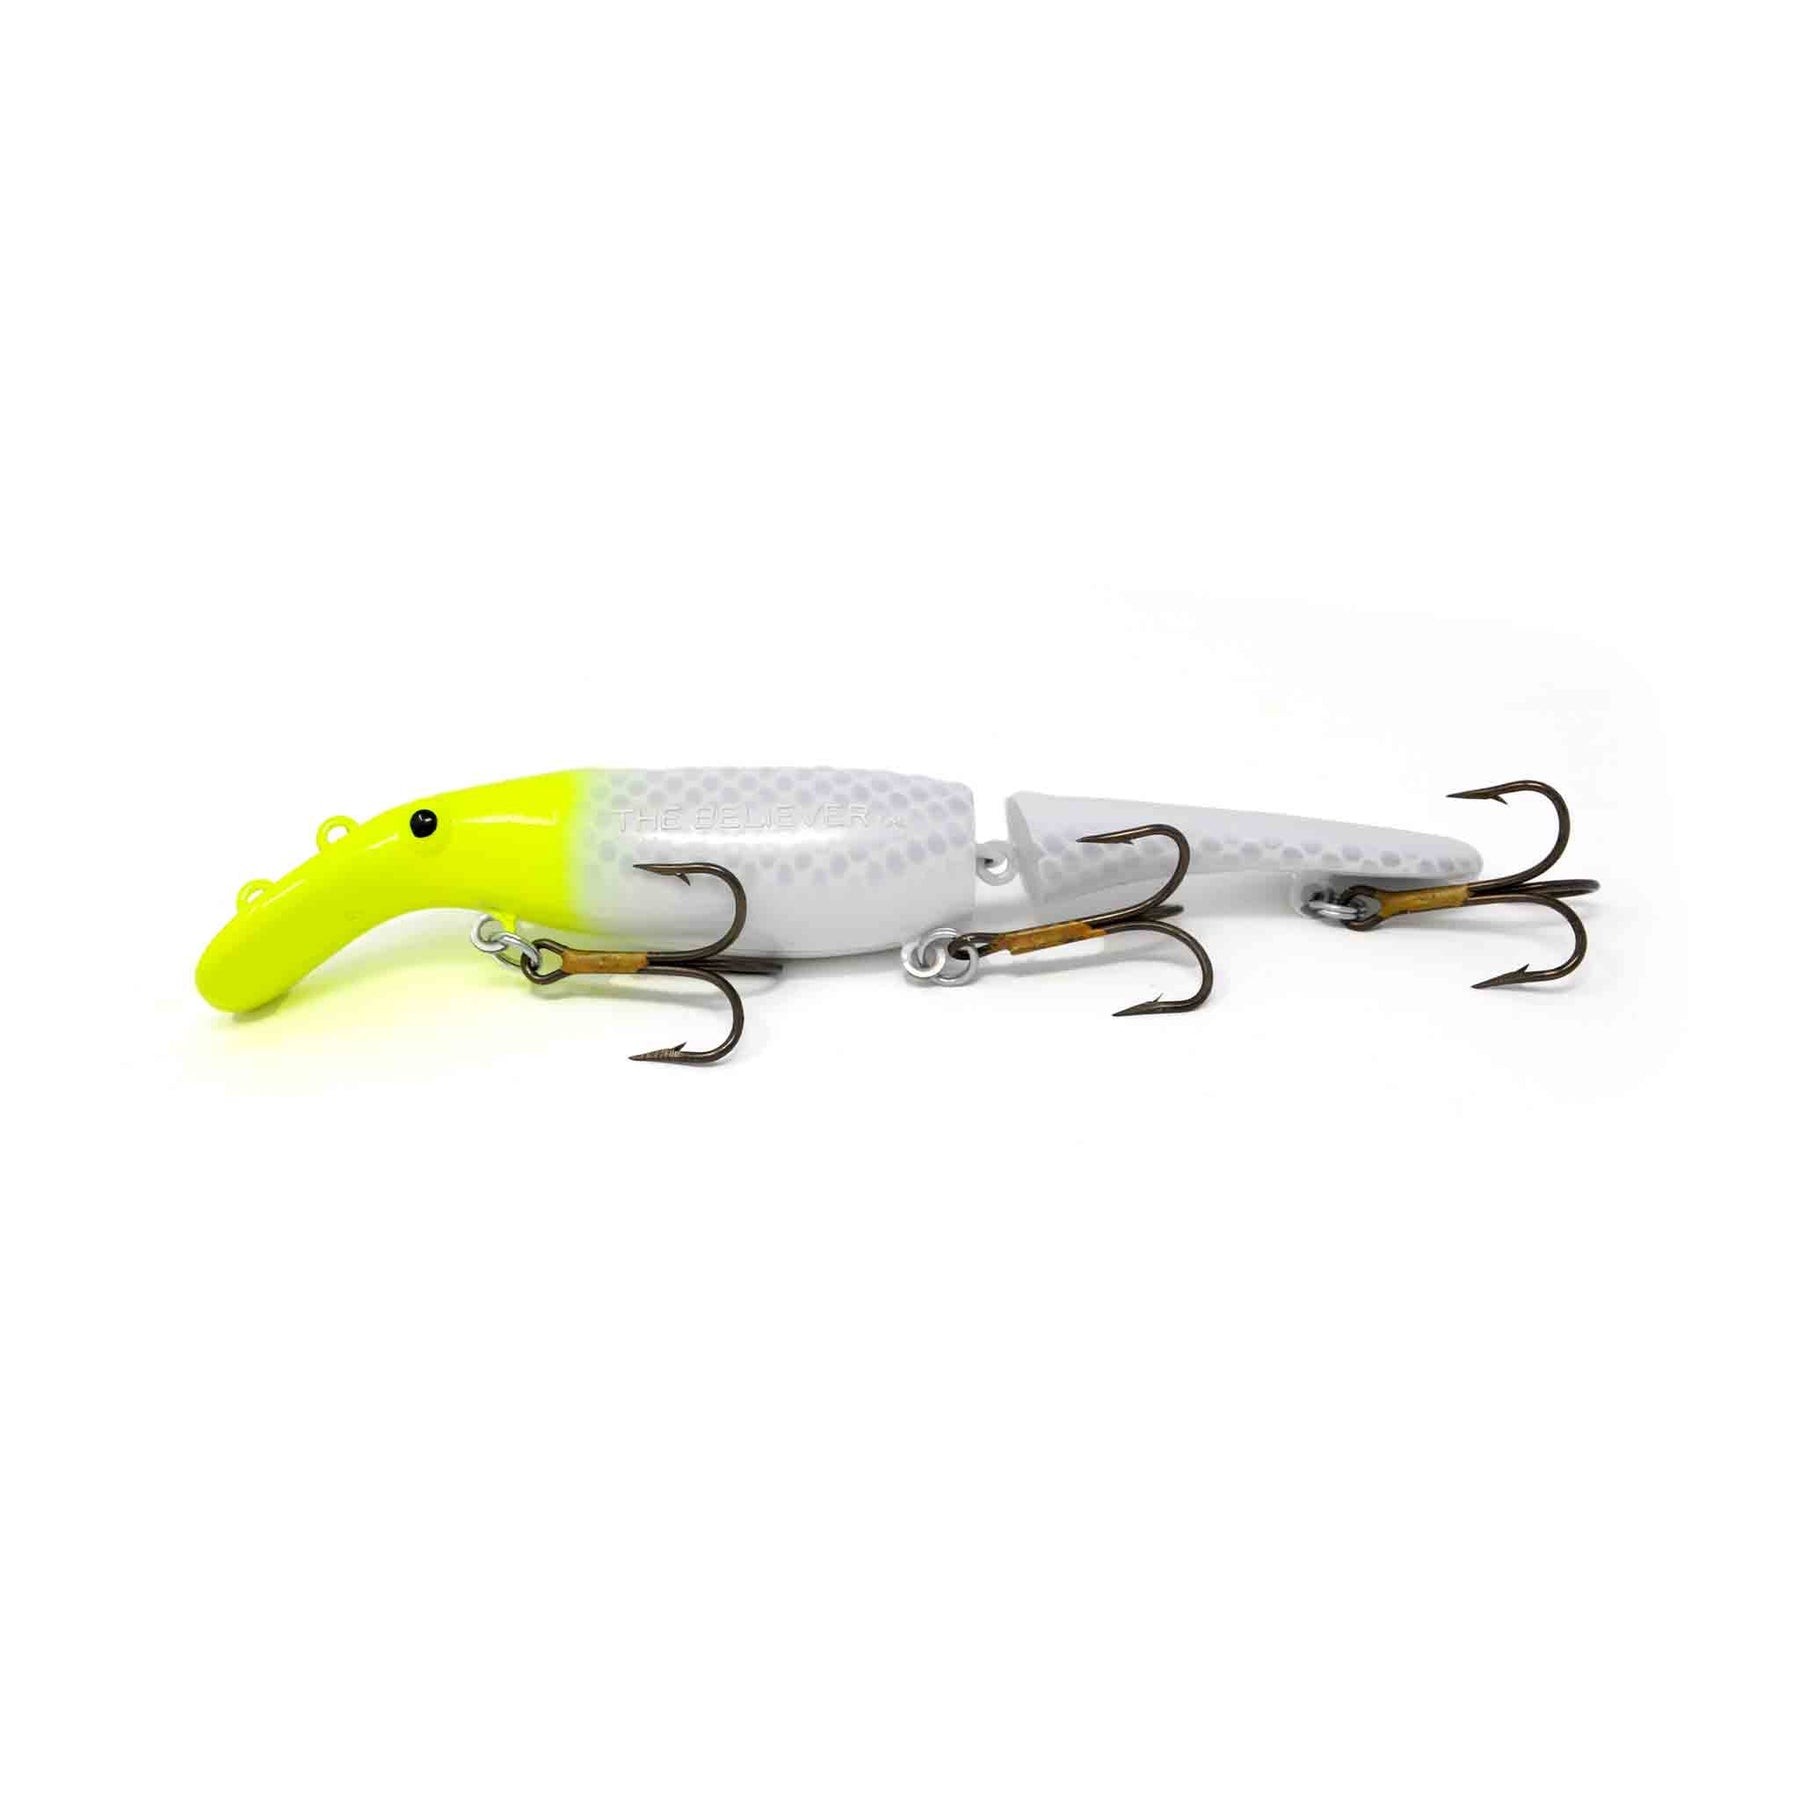 View of Crankbaits Drifter Tackle Believer Jointed 8" Crankbait Lemon Head available at EZOKO Pike and Musky Shop